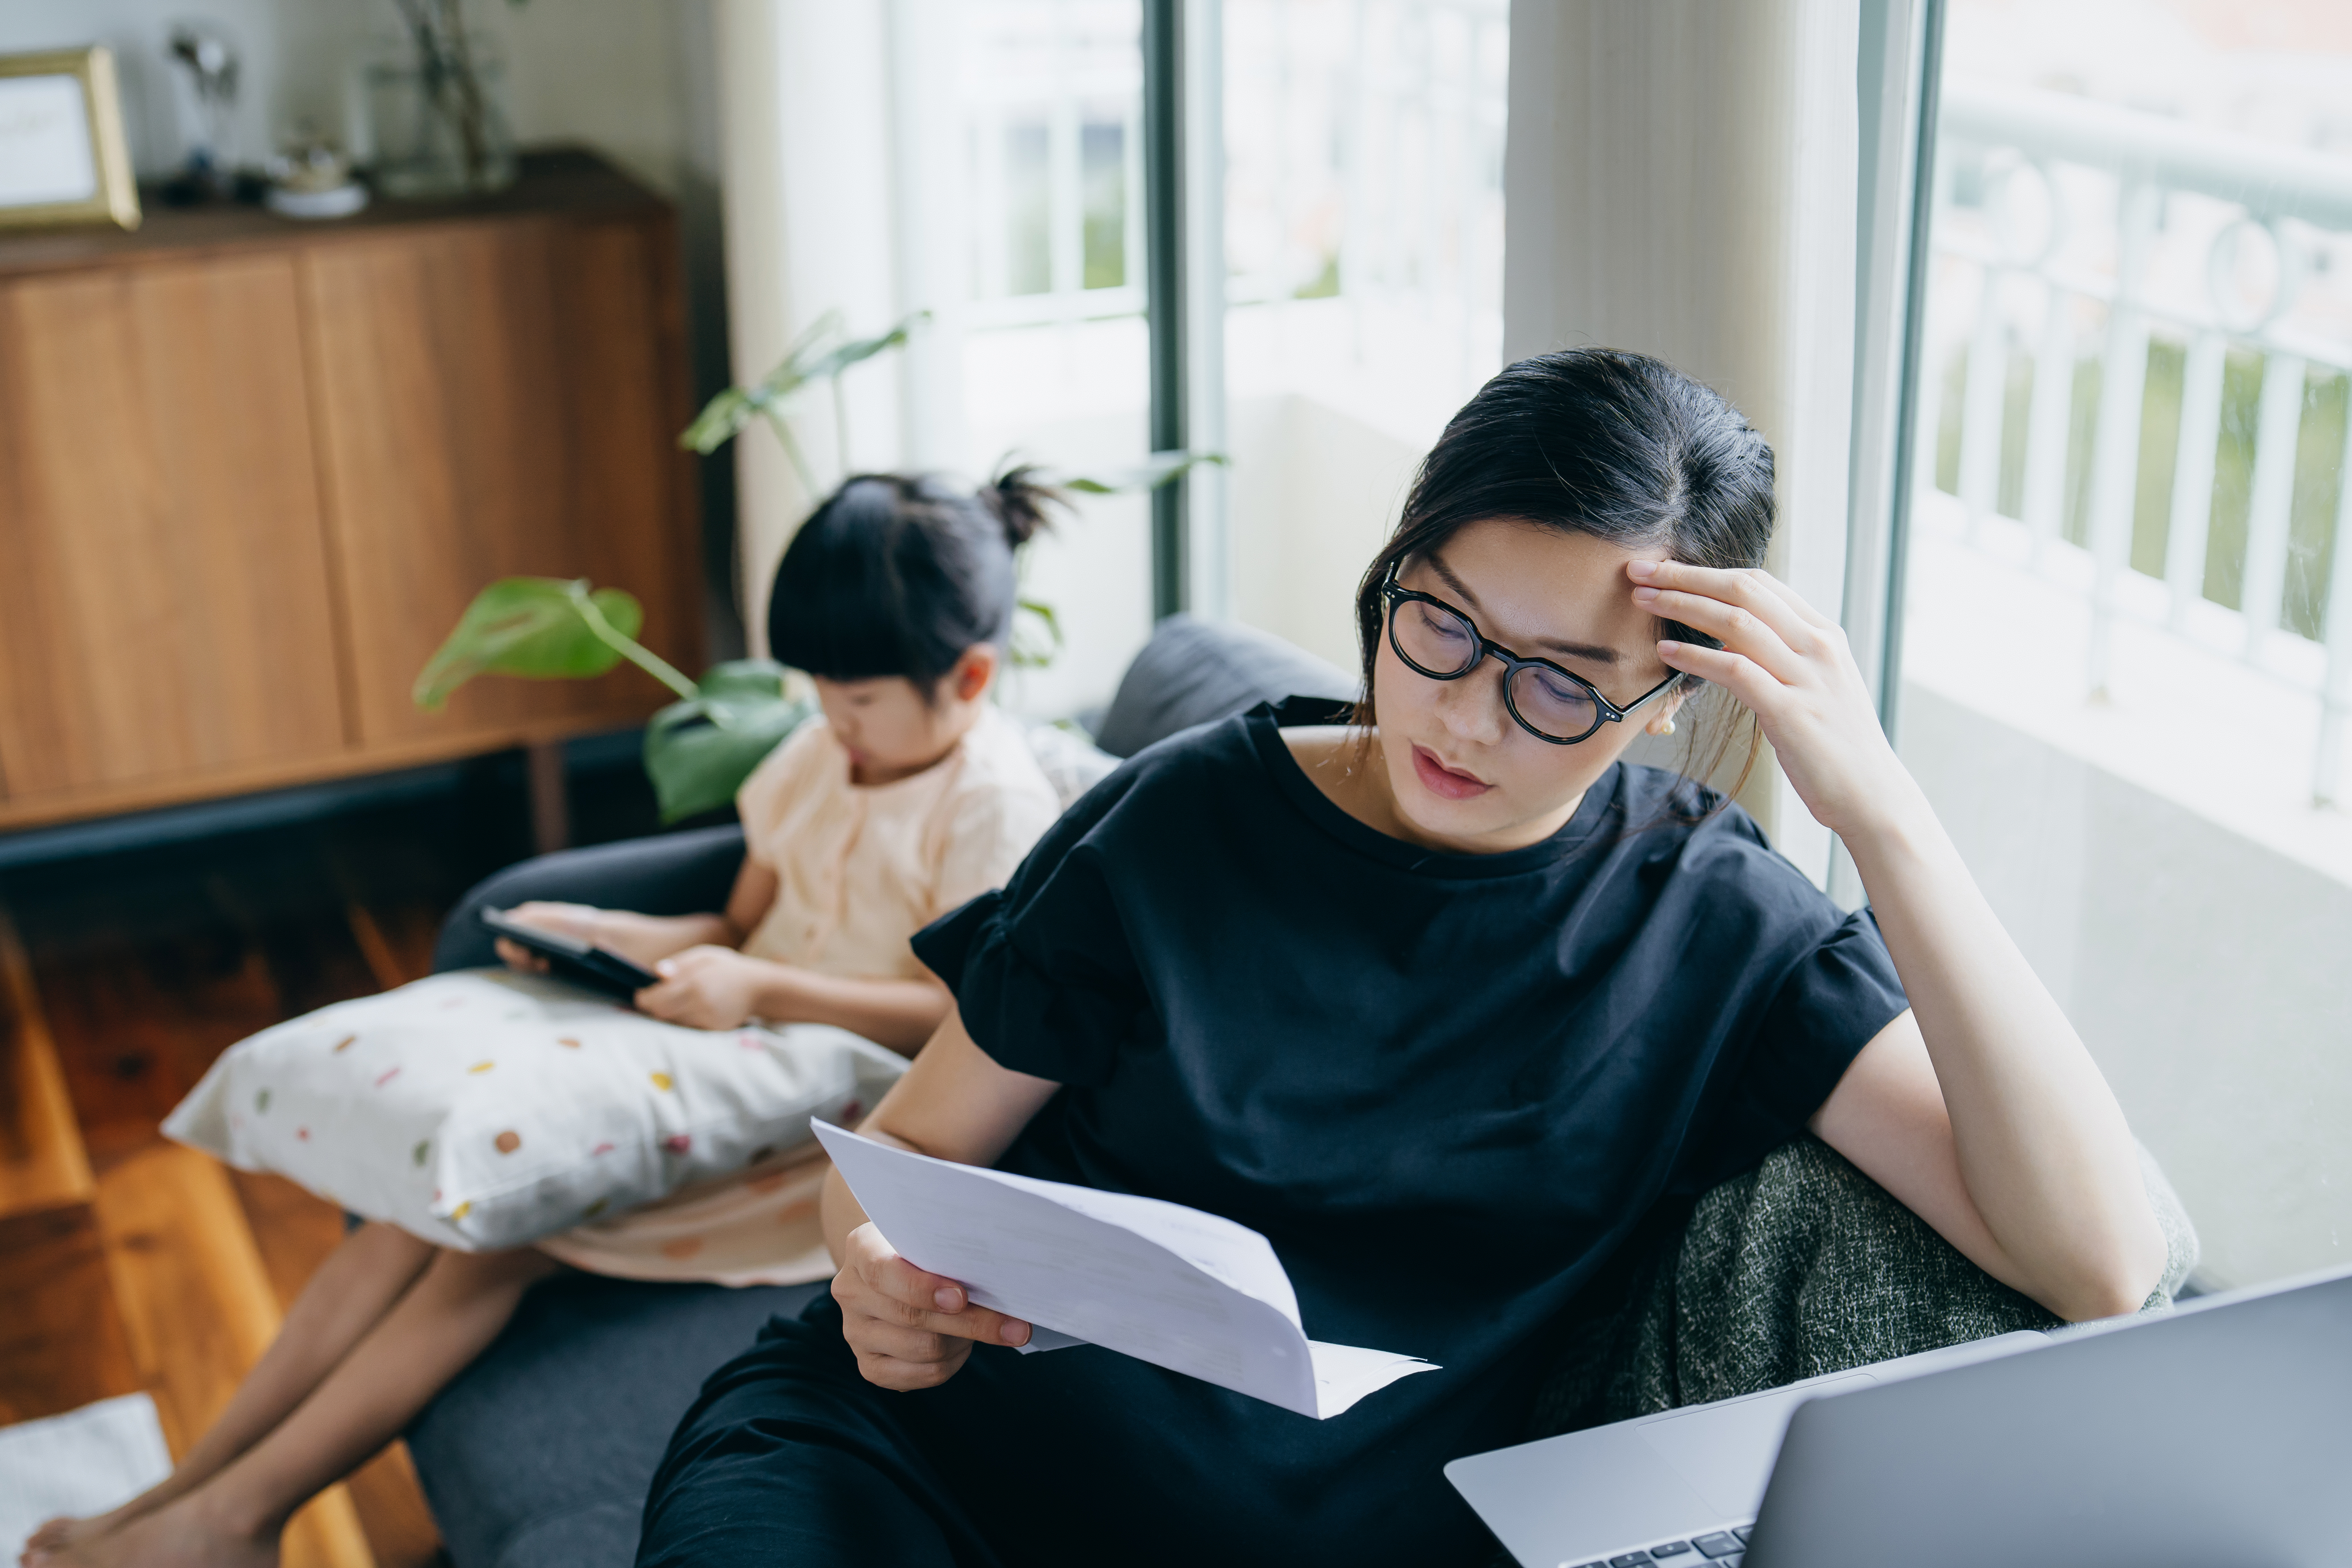 Young Asian mother looking stressed while managing her financial bills and tax documents, working from home on laptop and her daughter is using digital tablet in the background. Working mother managing work life and childcare at home